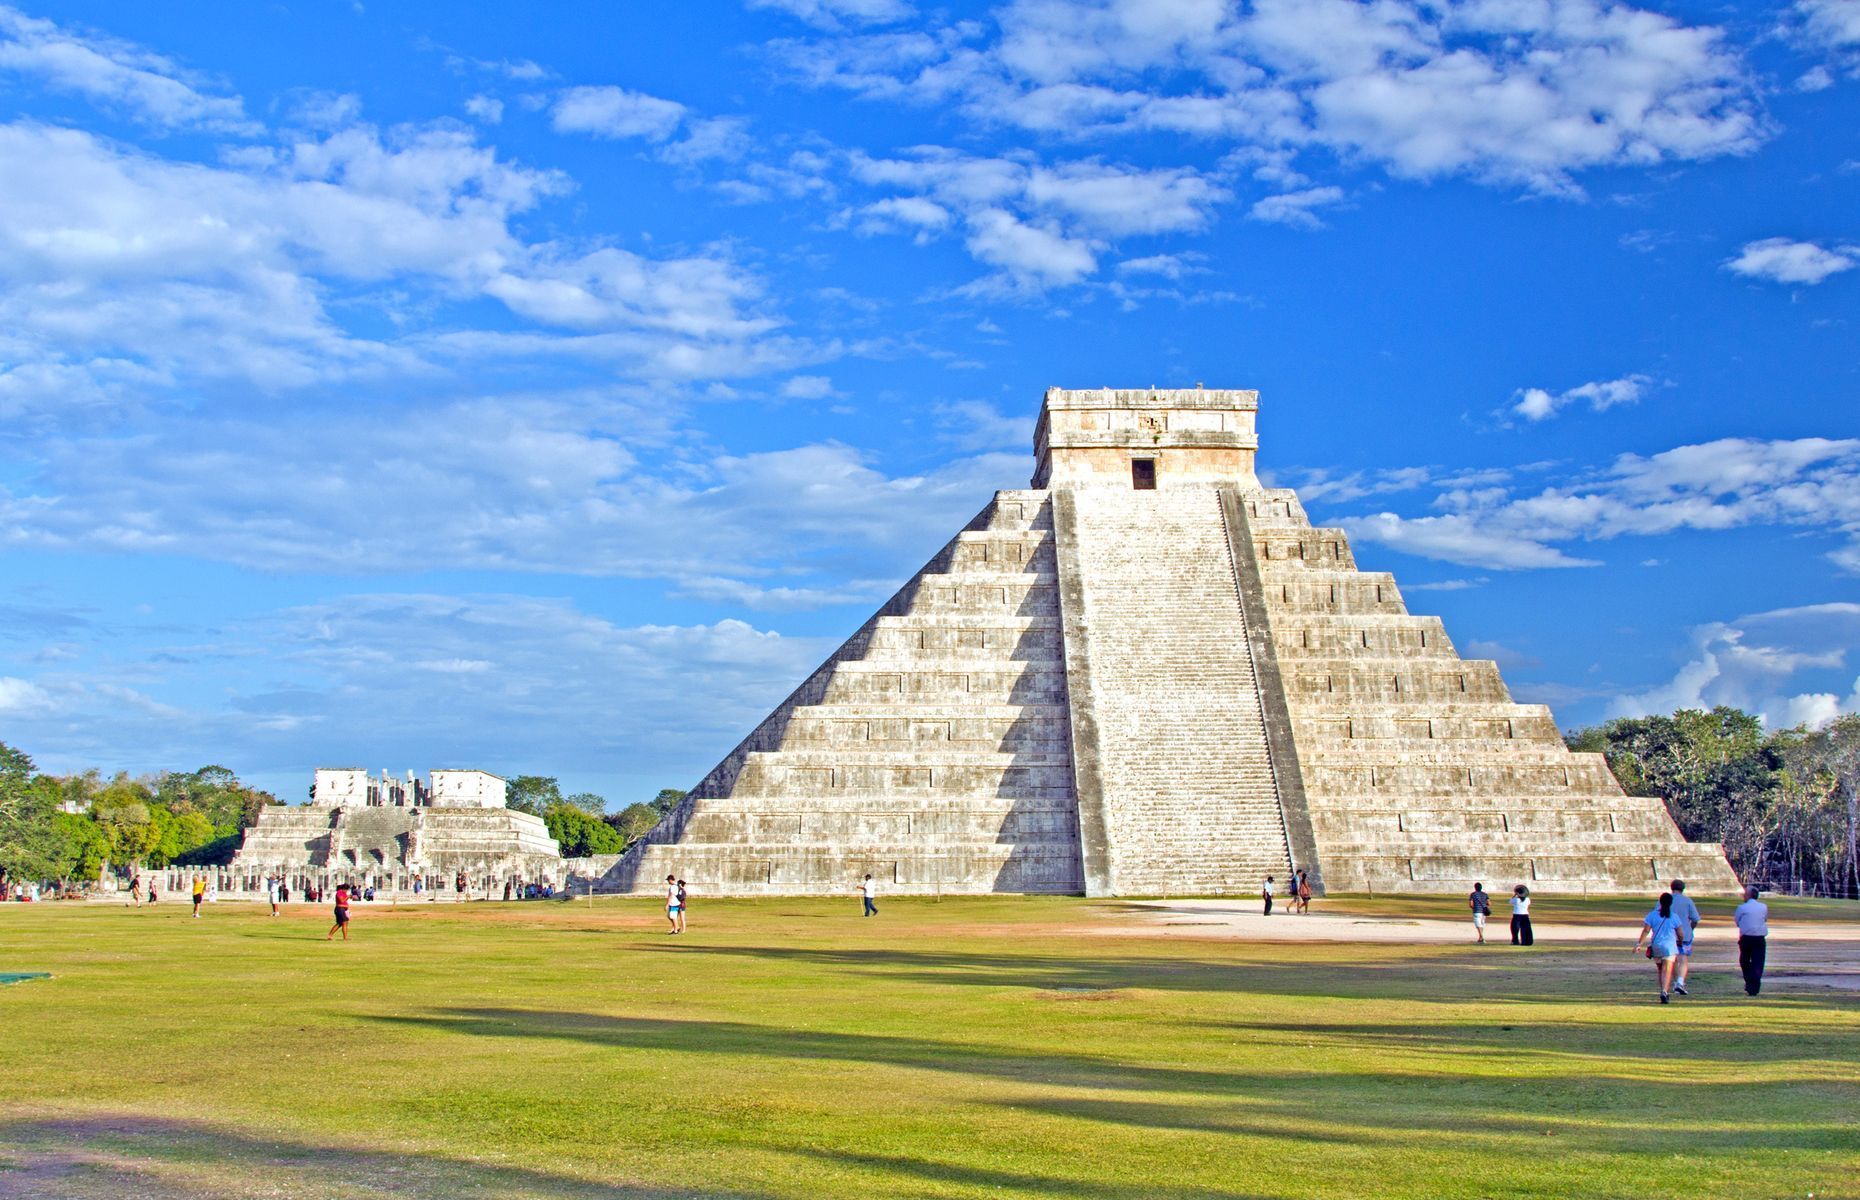 <p>One of Mexico’s best-preserved Maya sites, Chichén Itzá, served as the religious centre of the Yucatán Peninsula. Dating to the 10th century and the Toltecs’ arrival in Yucatán, the site <a href="http://whc.unesco.org/en/list/483/" rel="noreferrer noopener">combined Maya culture with that of the newcomers</a>. This explains why Chichén Itzá’s most spectacular building, the Kukulcán pyramid, is dedicated to the Toltecs’ feathered serpent god. More than <a href="https://www.theyucatantimes.com/2017/10/yucatan-cultural-attractions-poised-to-break-annual-visitors-record/" rel="noreferrer noopener">2 million people visited Chichén Itzá</a> in 2016.</p>